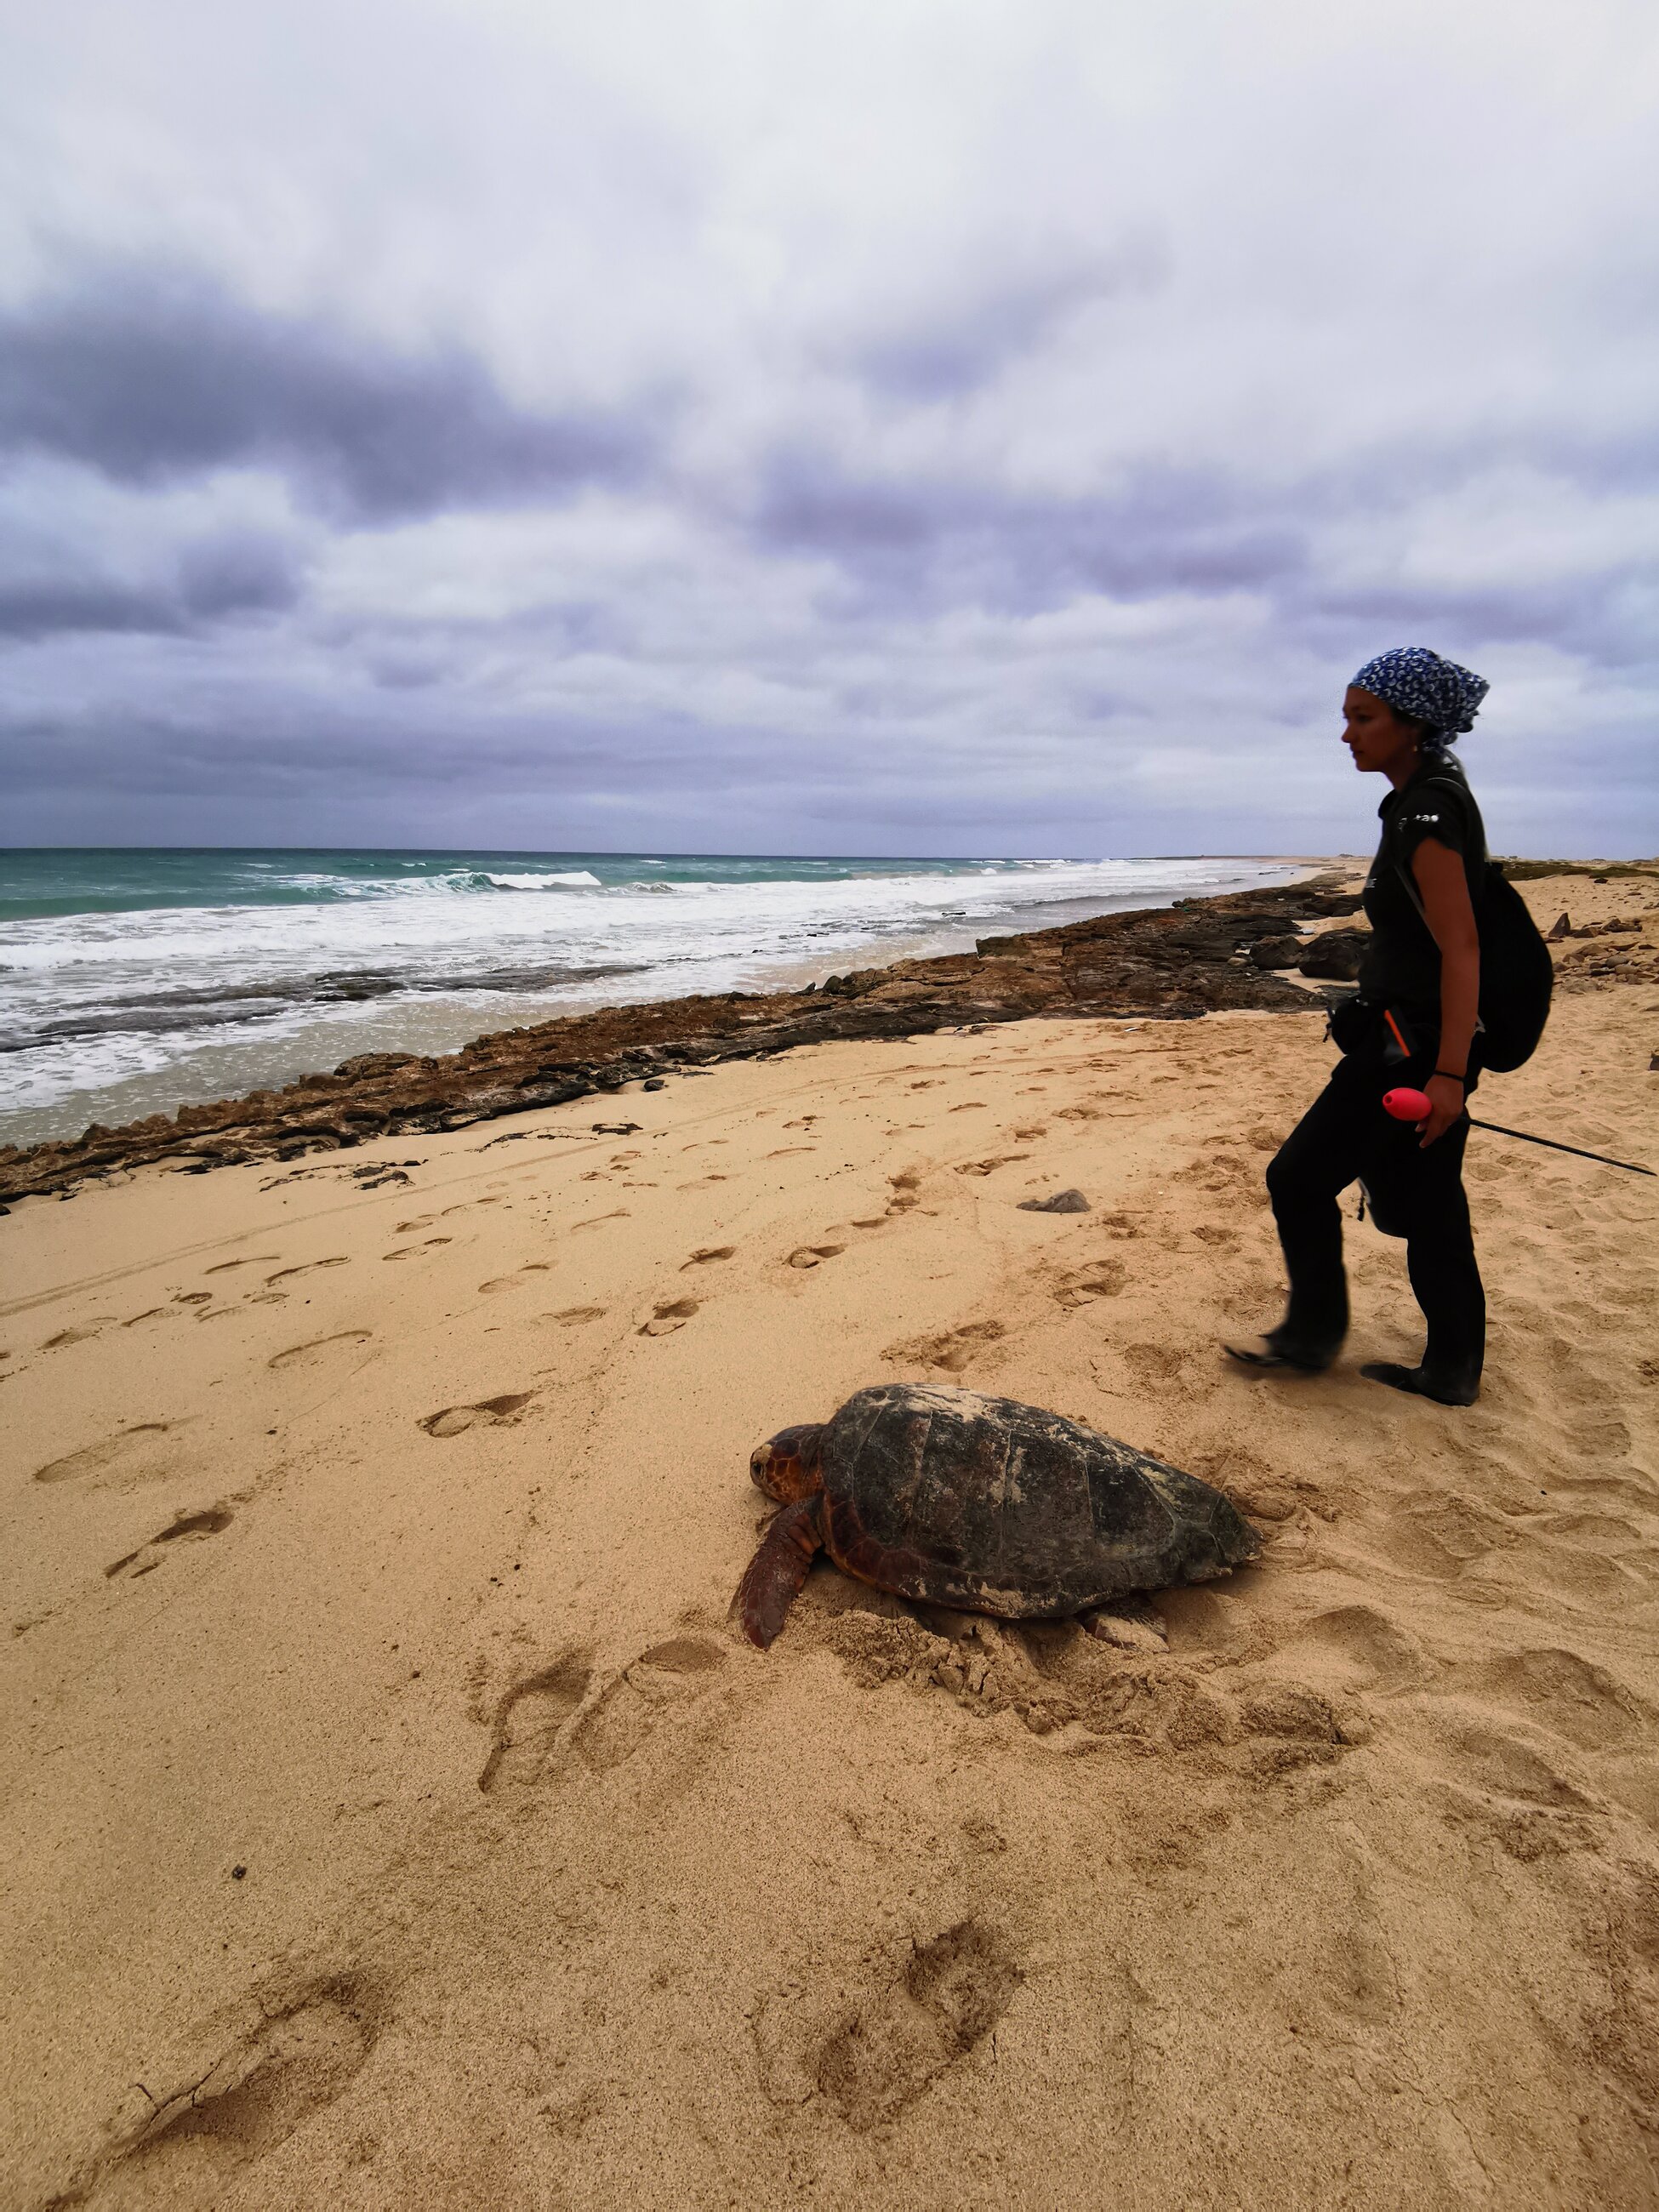 Helping turtles that got last in the dunes